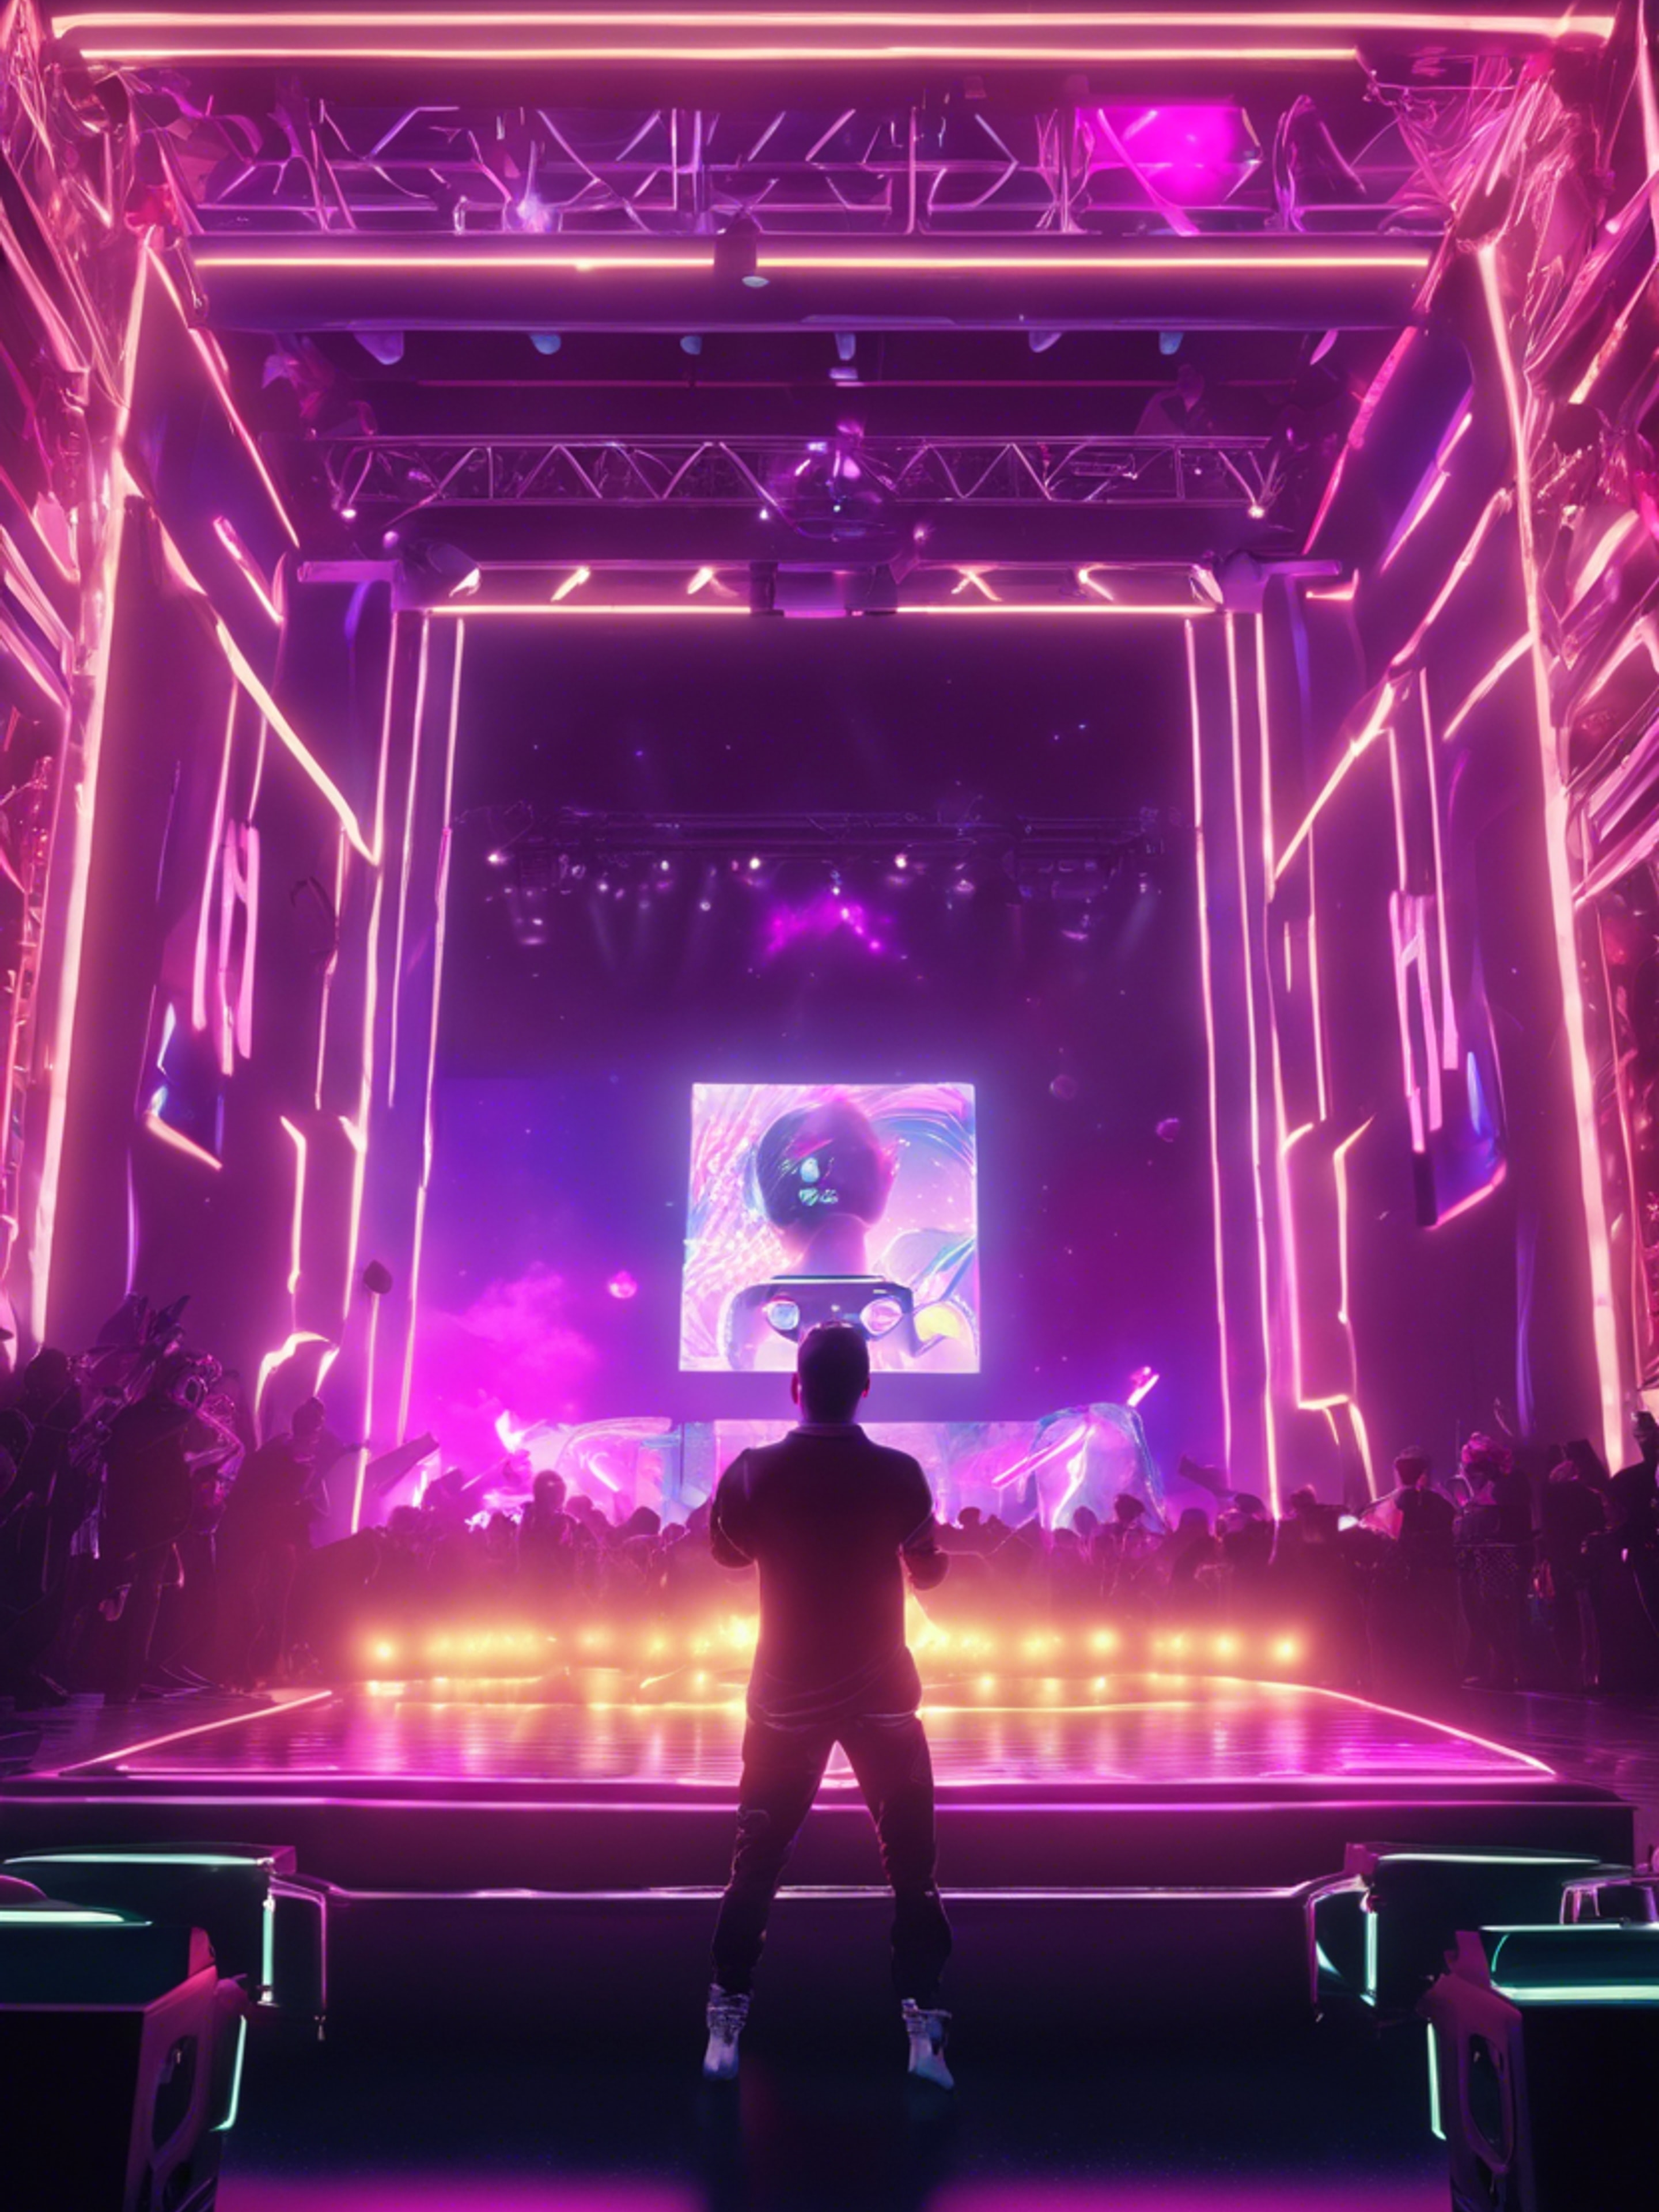 A virtual concert in a Y2K gaming environment, with neon spotlights showcasing a digital avatar performing onstage. ផ្ទាំង​រូបភាព[570c0802add746f5a0b1]